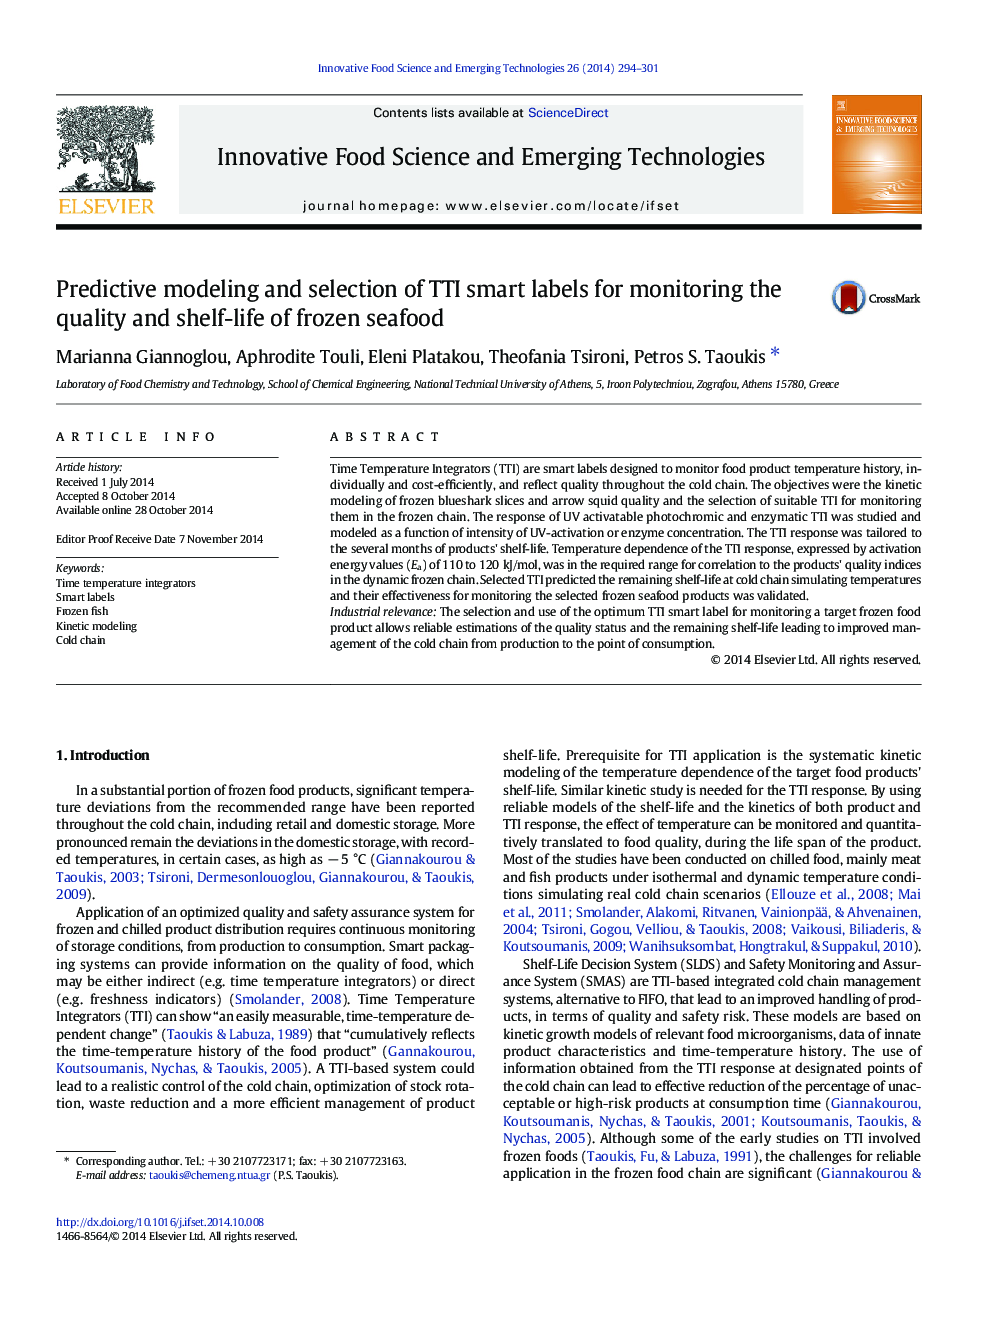 Predictive modeling and selection of TTI smart labels for monitoring the quality and shelf-life of frozen seafood